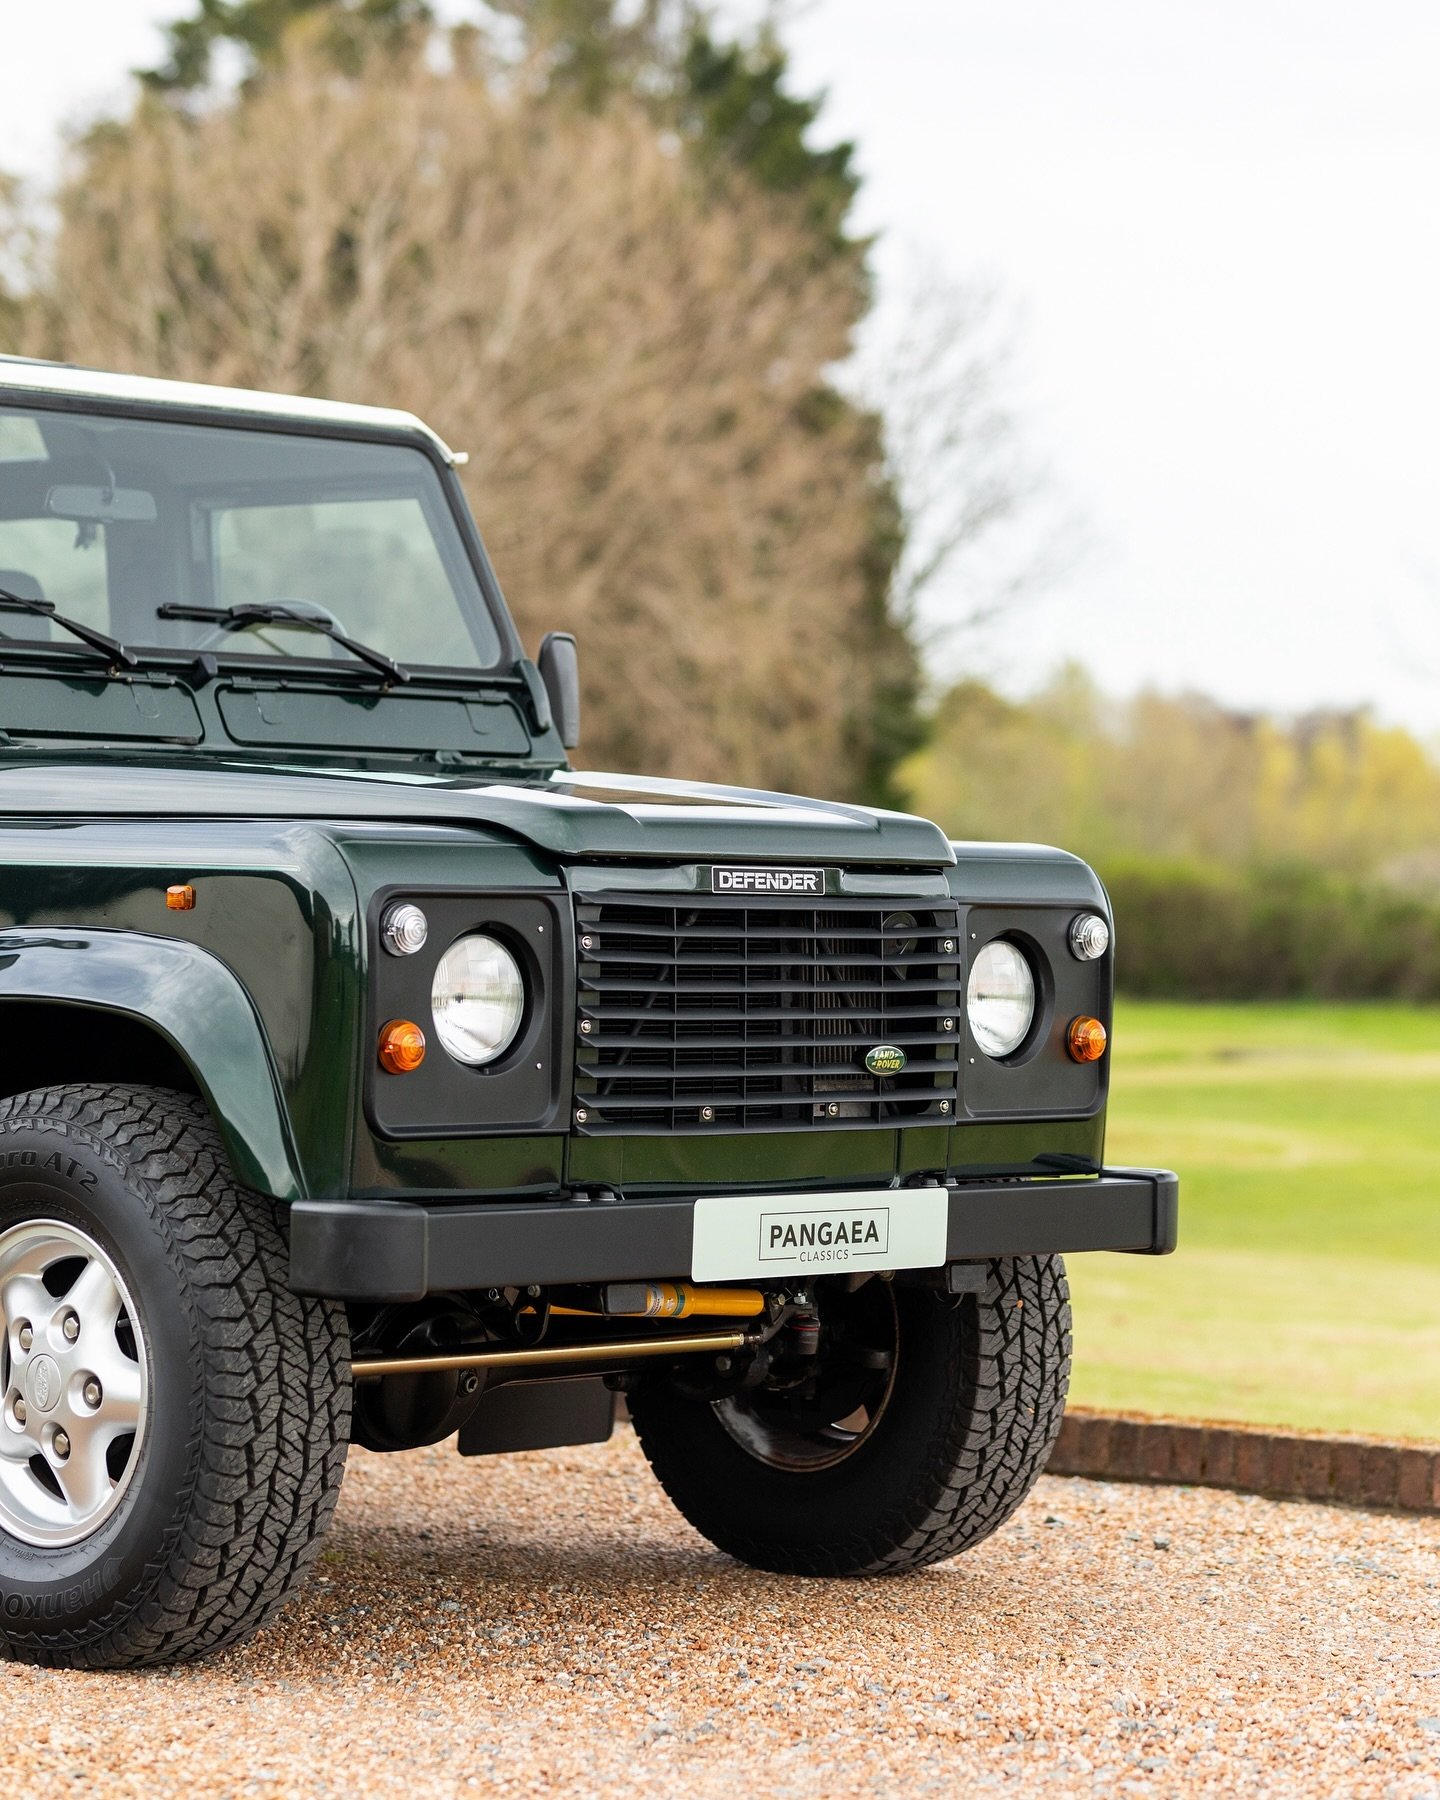 How good does Epsom Green look on a Defender!

Our stunning 30,000 mile French-market Highlander Edition. All the info is on our website. 

#landroverdefender #defender #landroverdefender90 #landroverdefender110 #defender90 #customdefender #defenderr